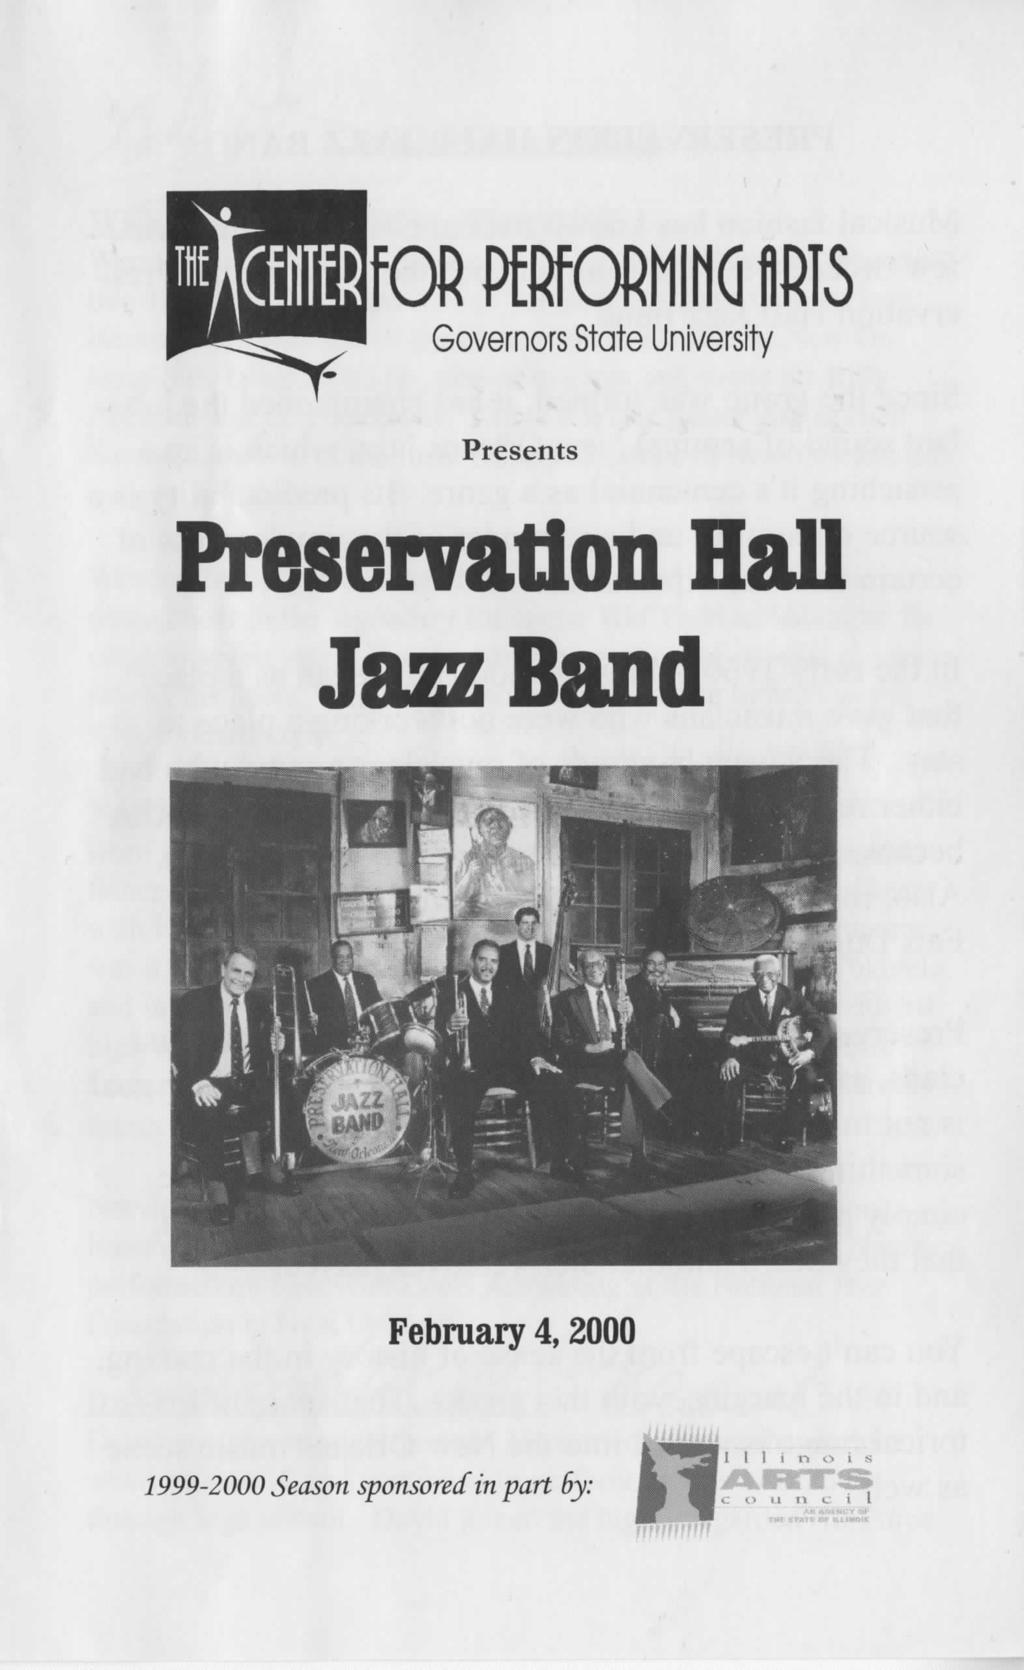 FOR PBOMIIM Governors State University Presents Preservation Hall Jazz Band